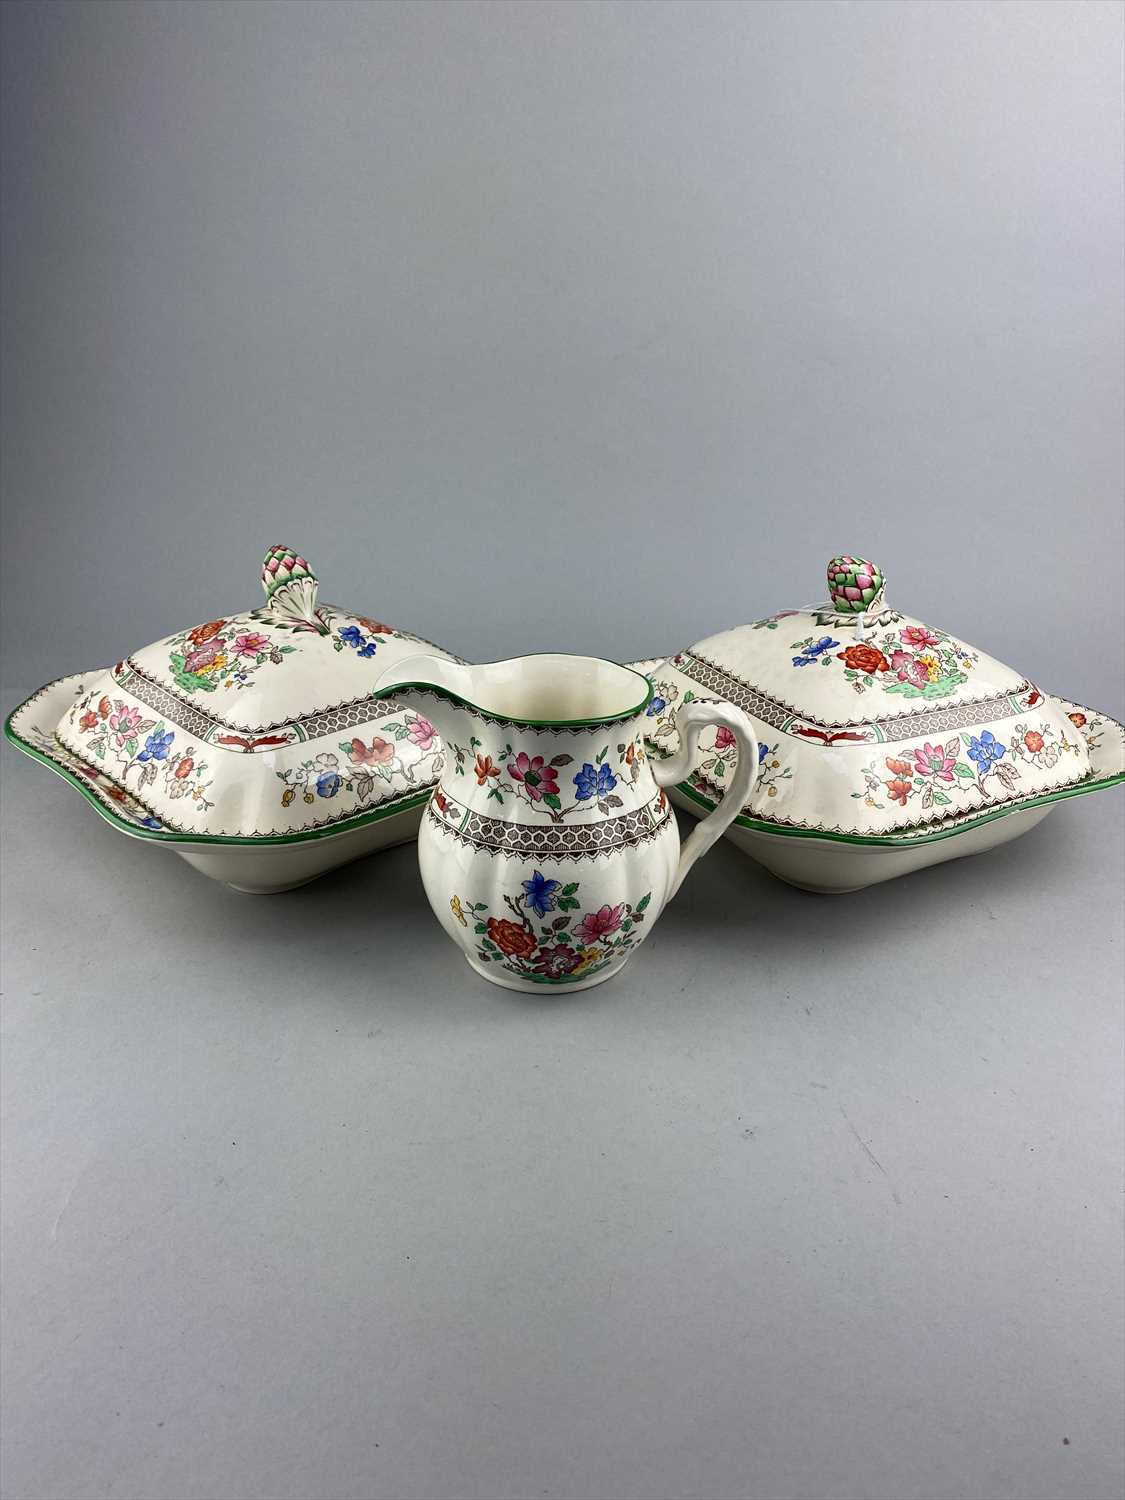 Lot 150 - A COPELAND SPODE 'CHINESE ROSE' PATTERN PART DINNER SERVICE